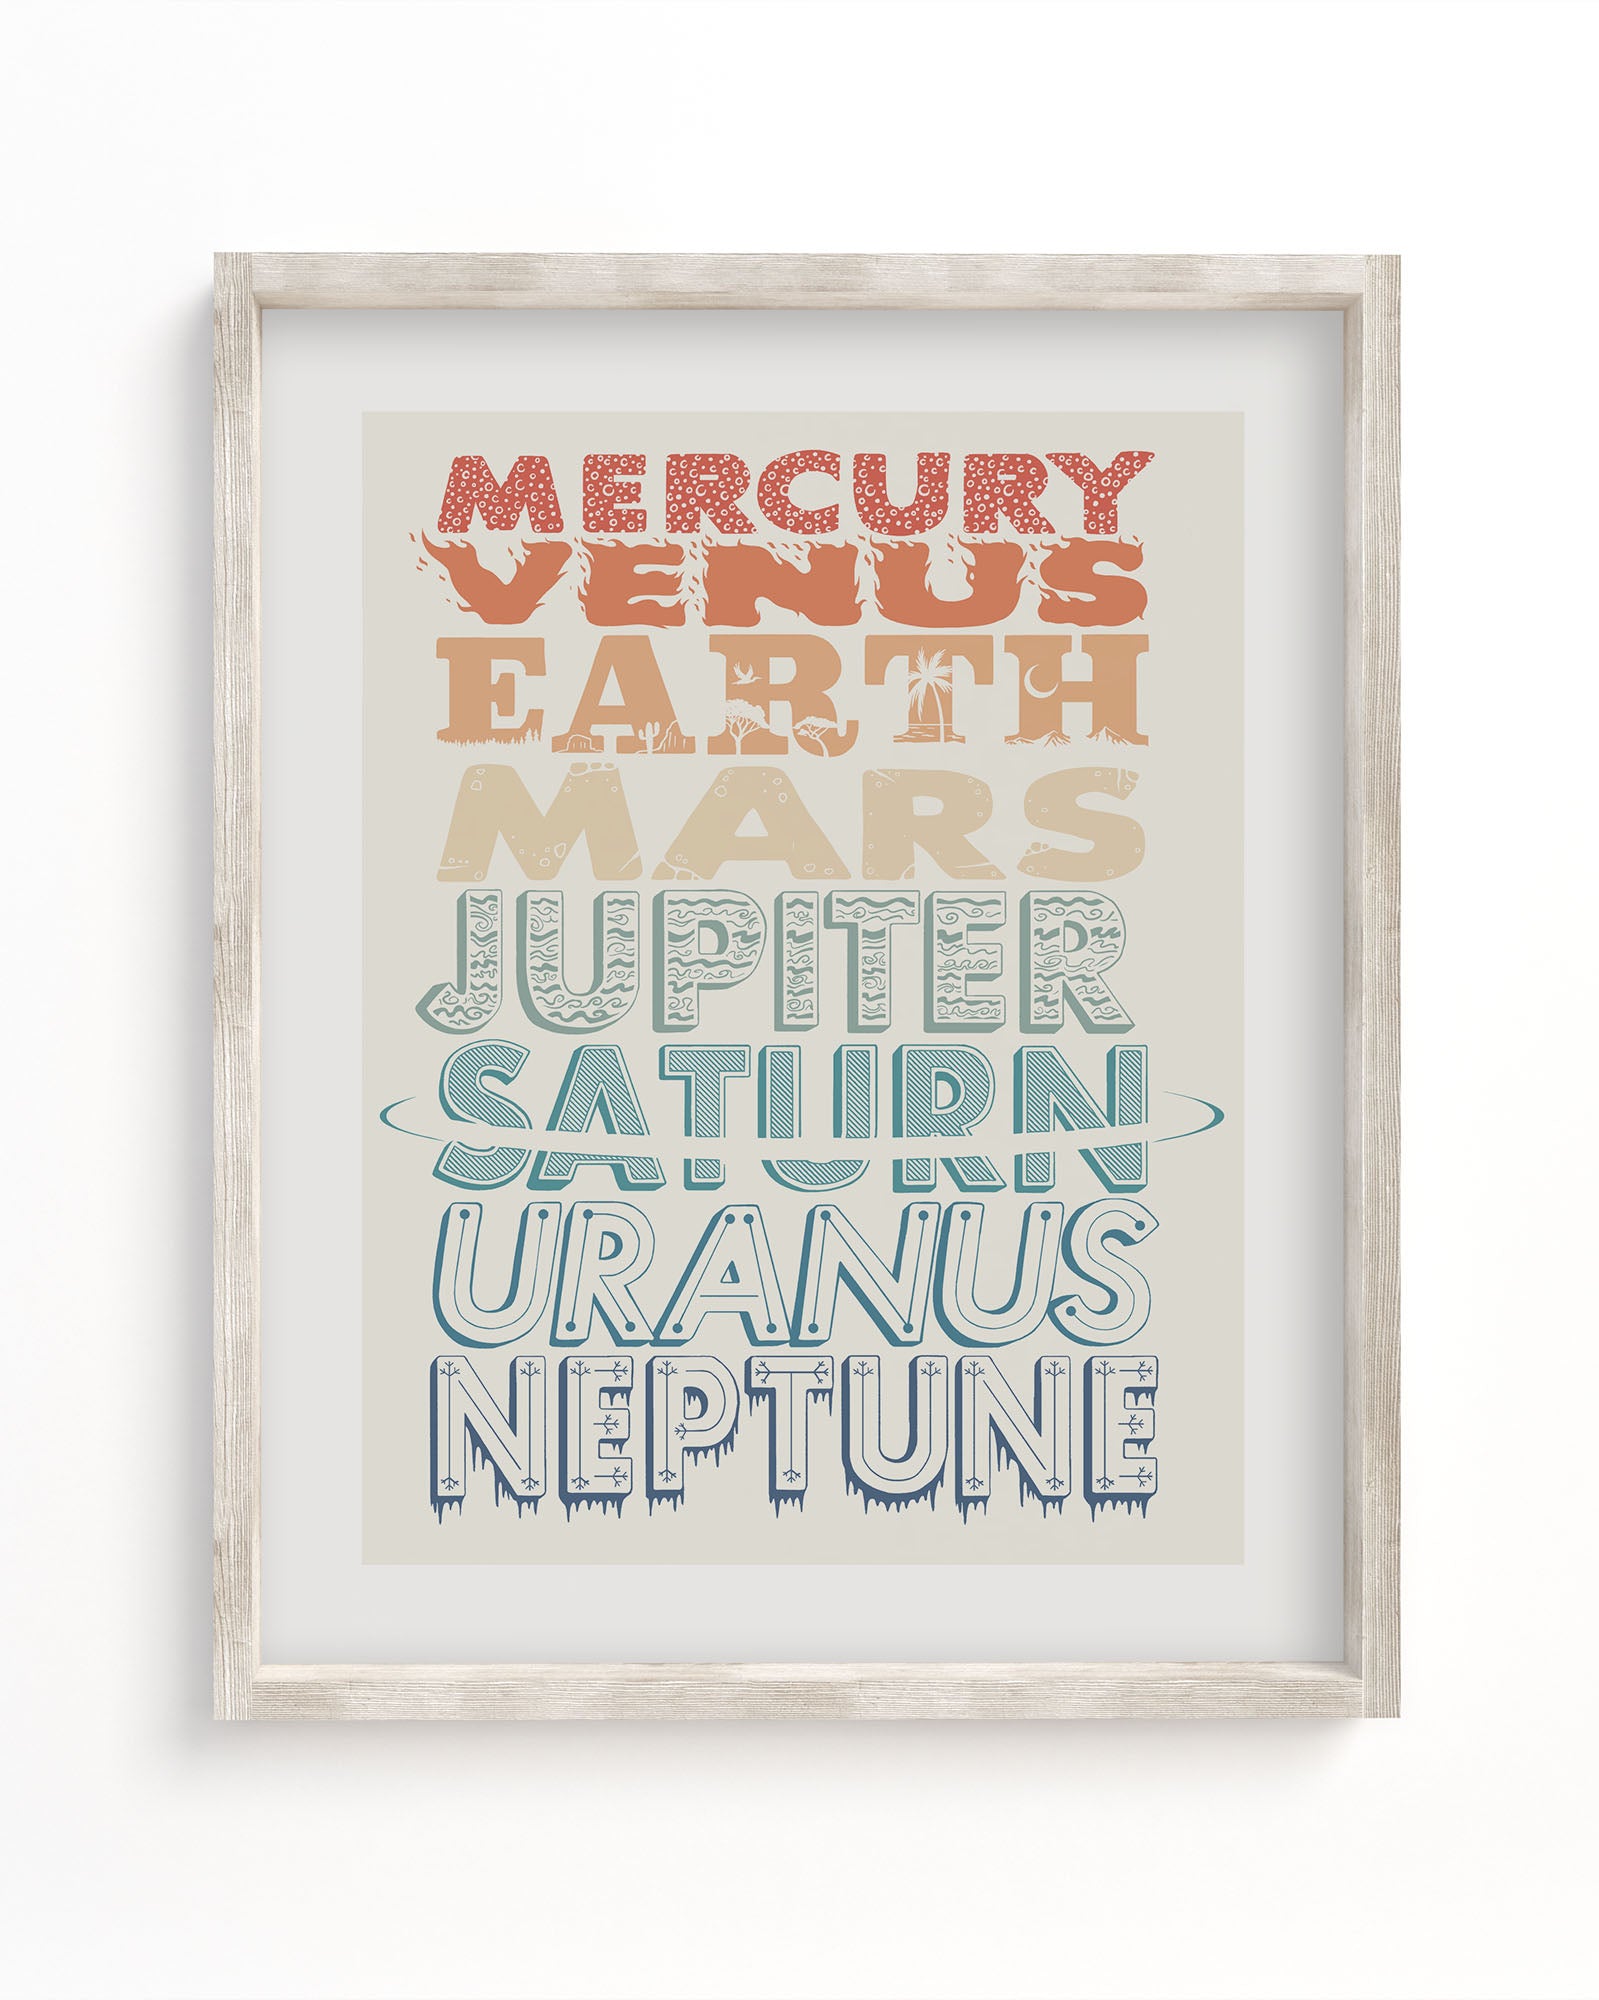 The Planets Museum Print